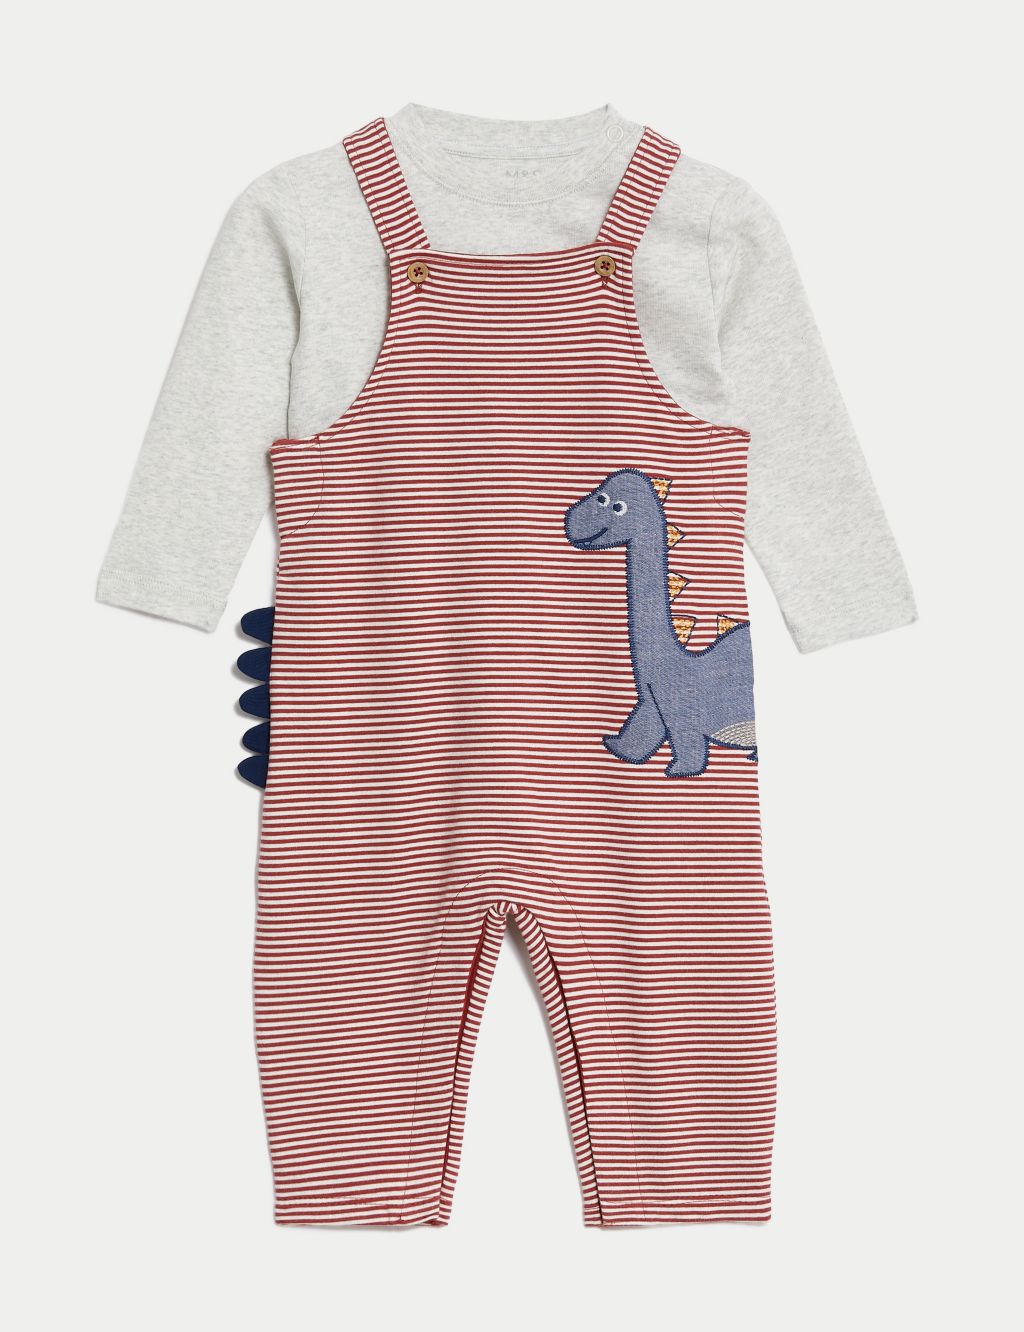 2pc Cotton Rich Striped Dinosaur Outfit (0-3 Yrs) image 2